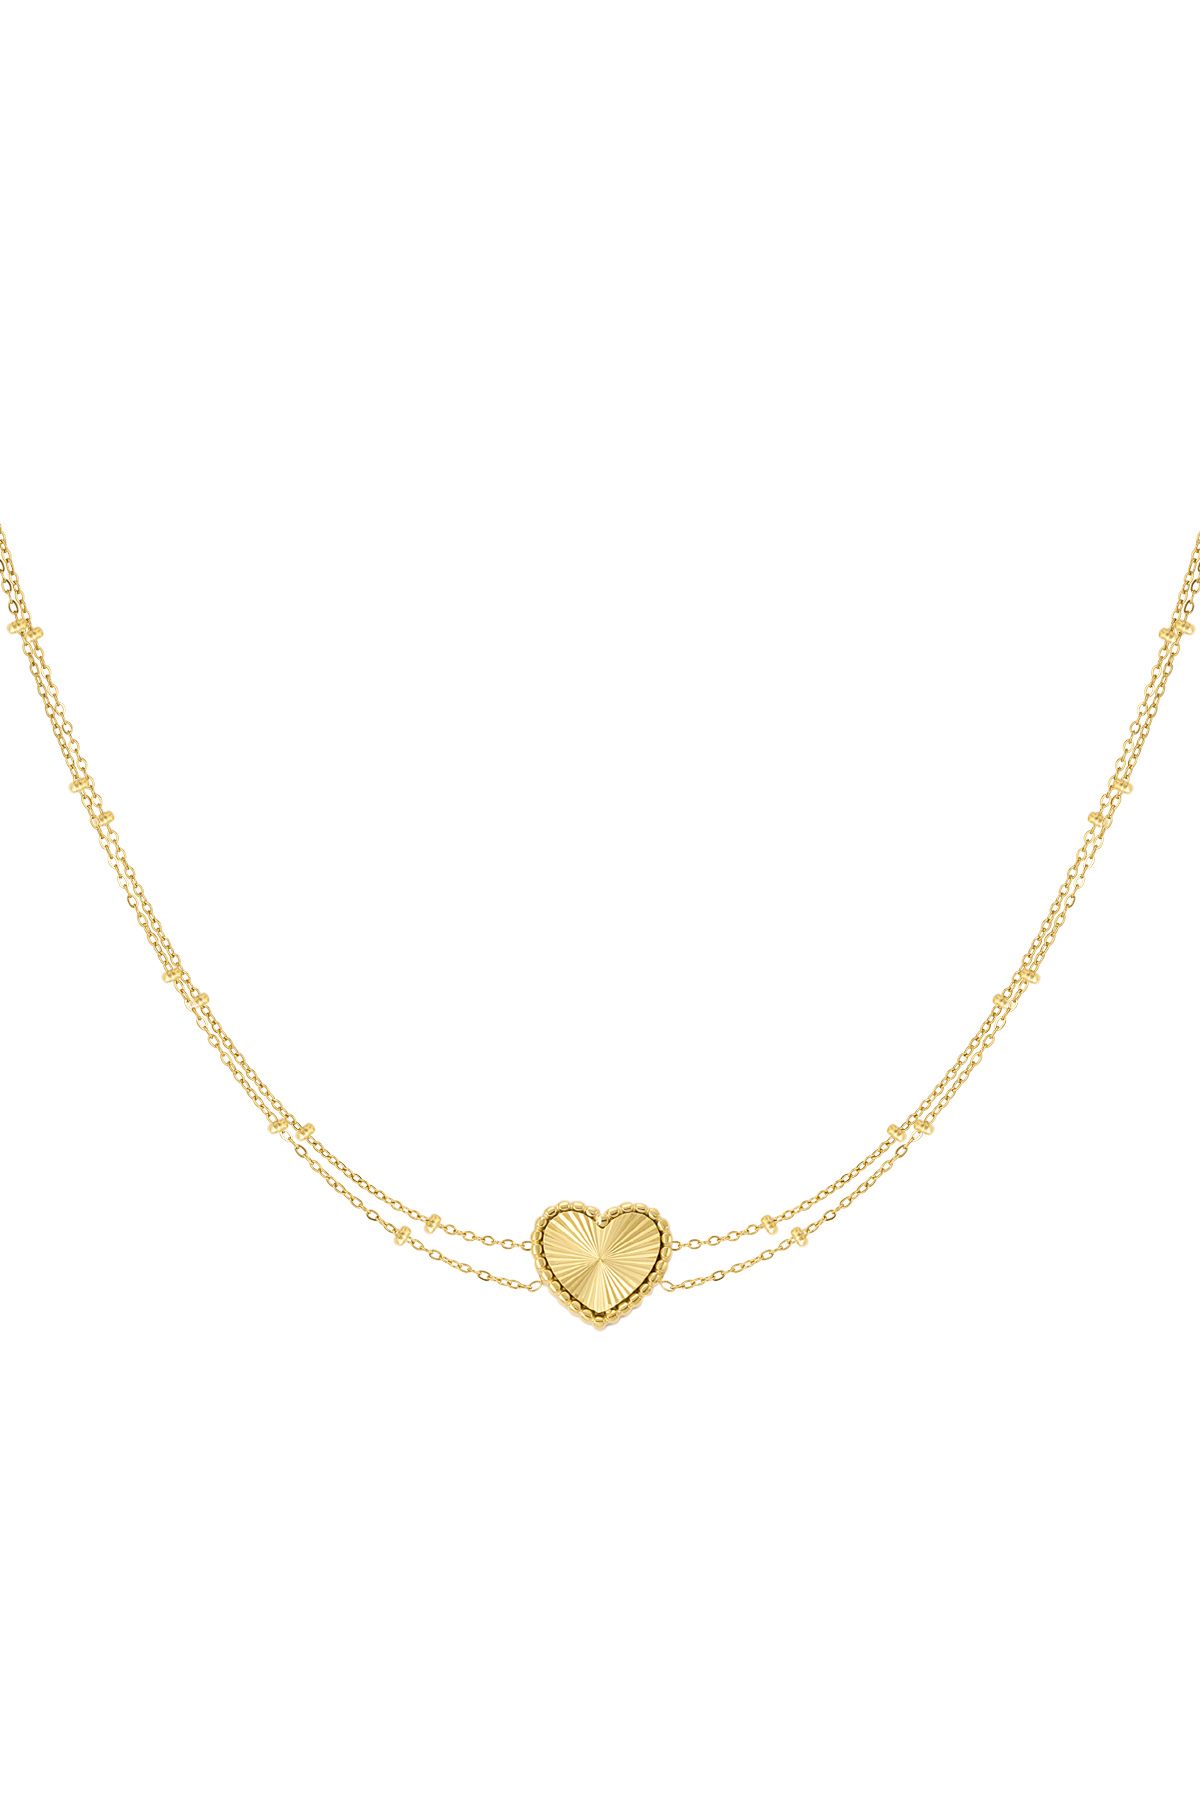 Necklace heart with balls - gold h5 